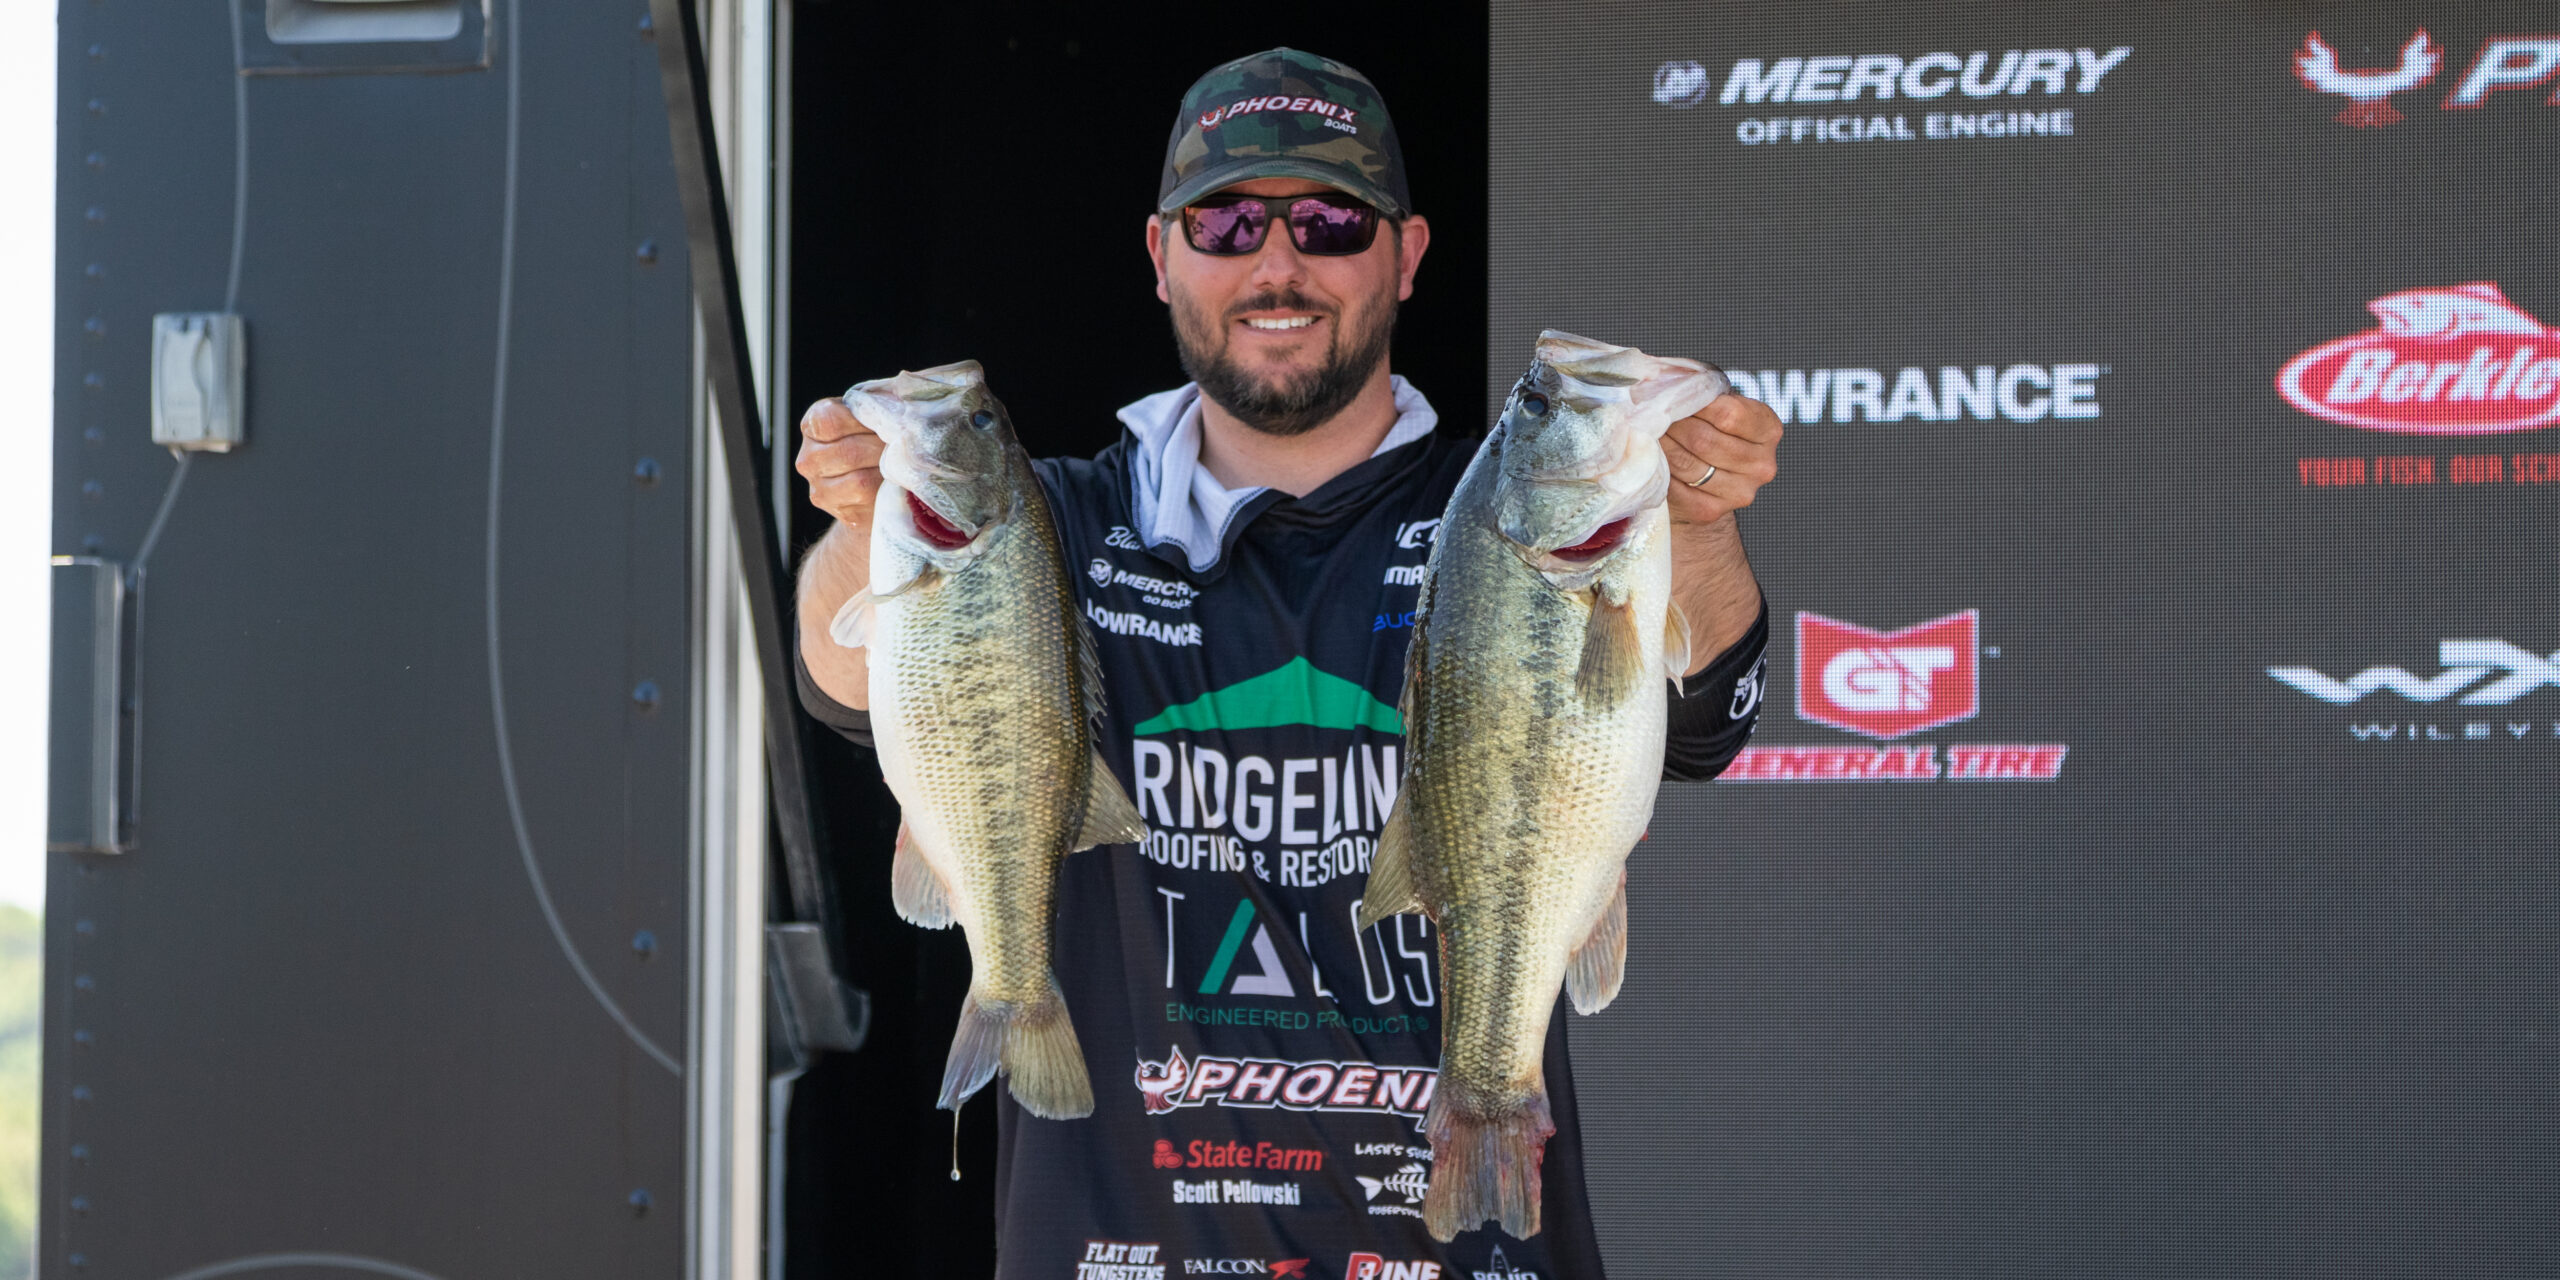 Hall leads on Eufaula with 22-2 out of the gate - Major League Fishing